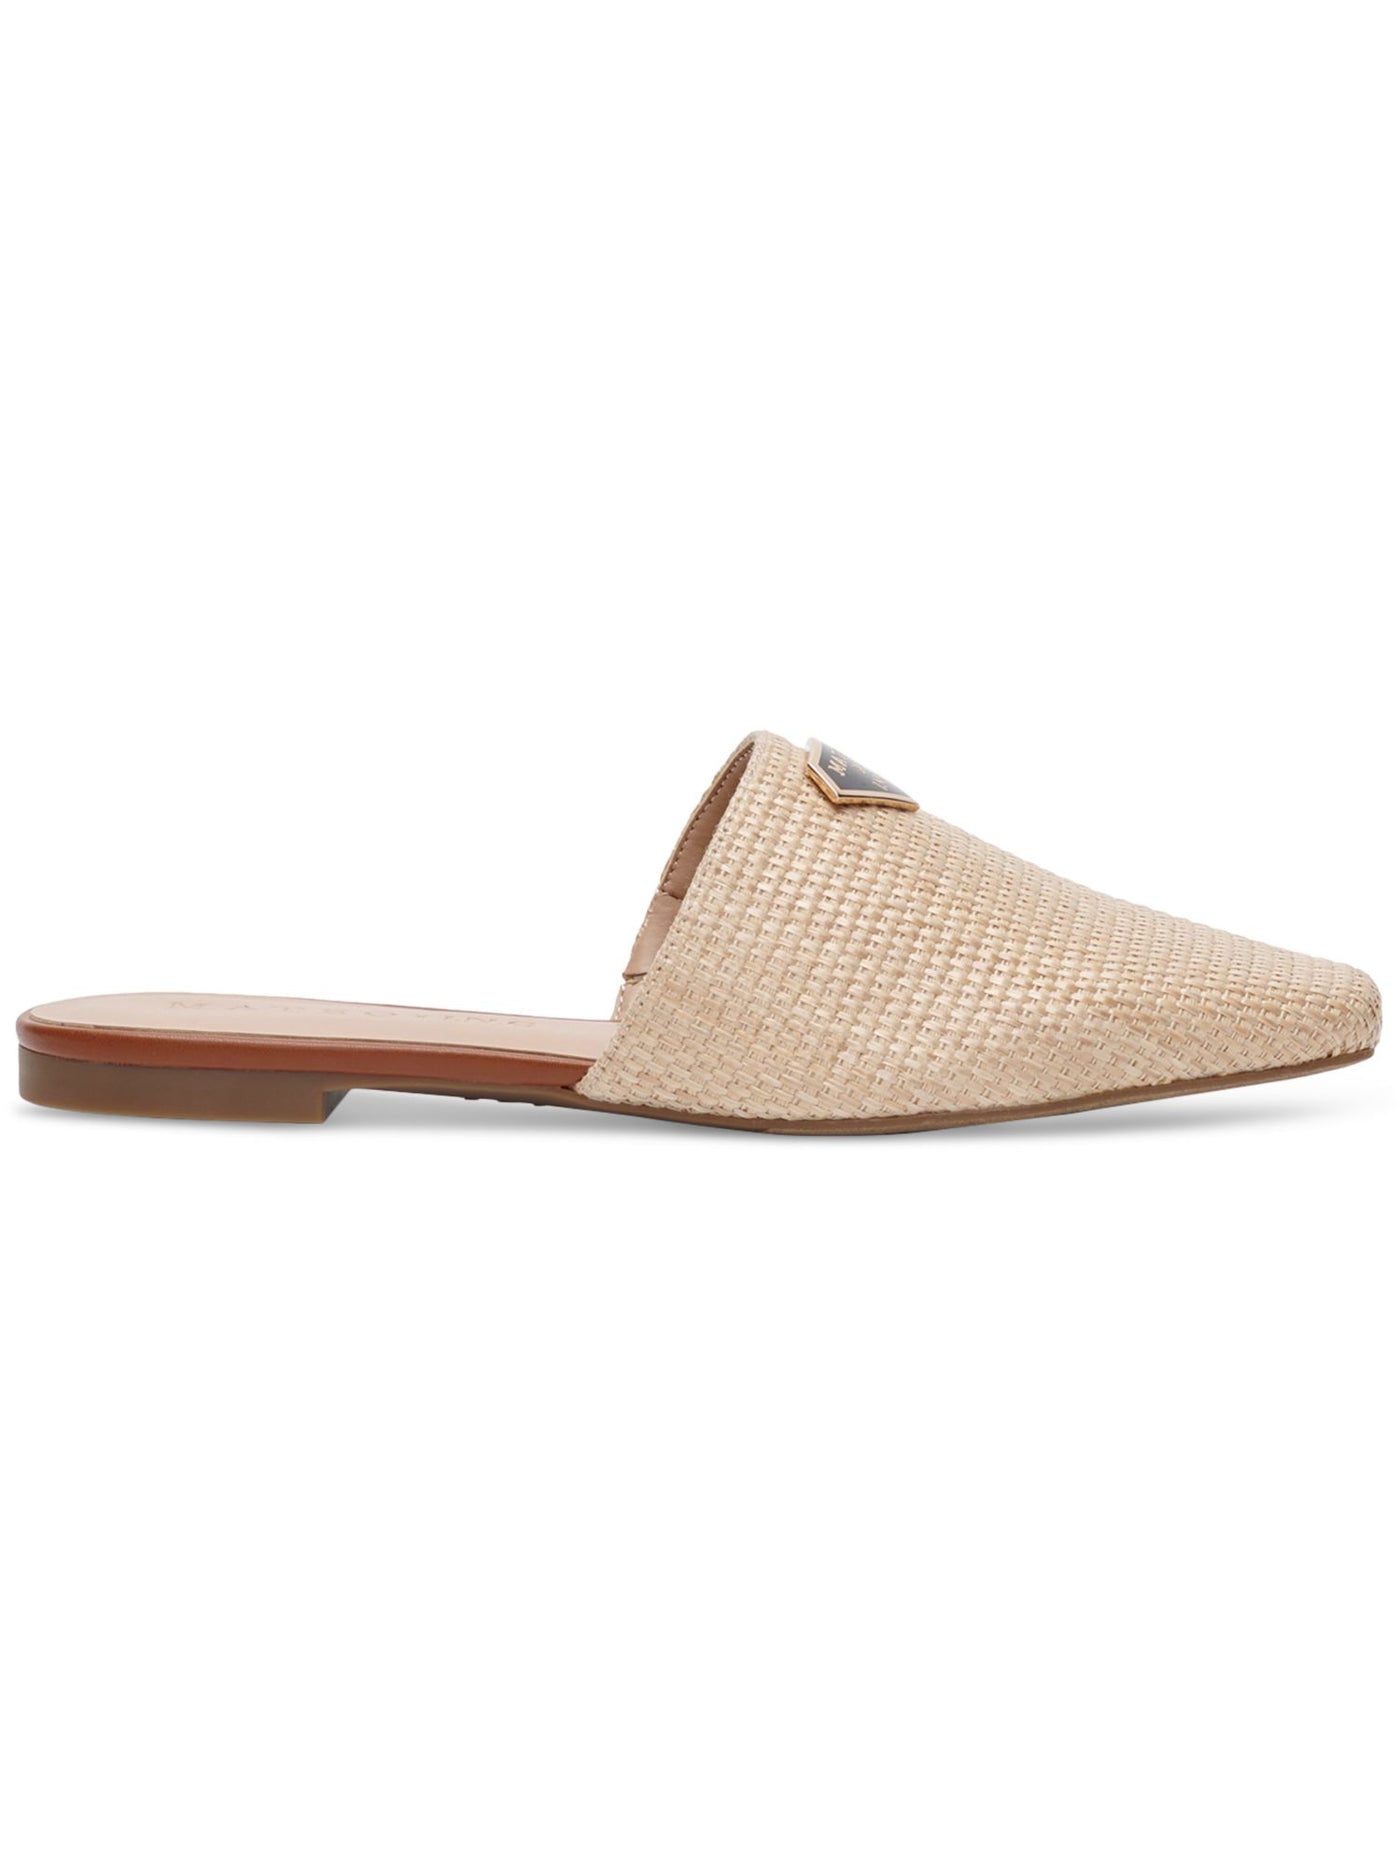 MATEO BY INC Womens Beige Woven Goring The Negril Square Toe Slip On Mules 9 M